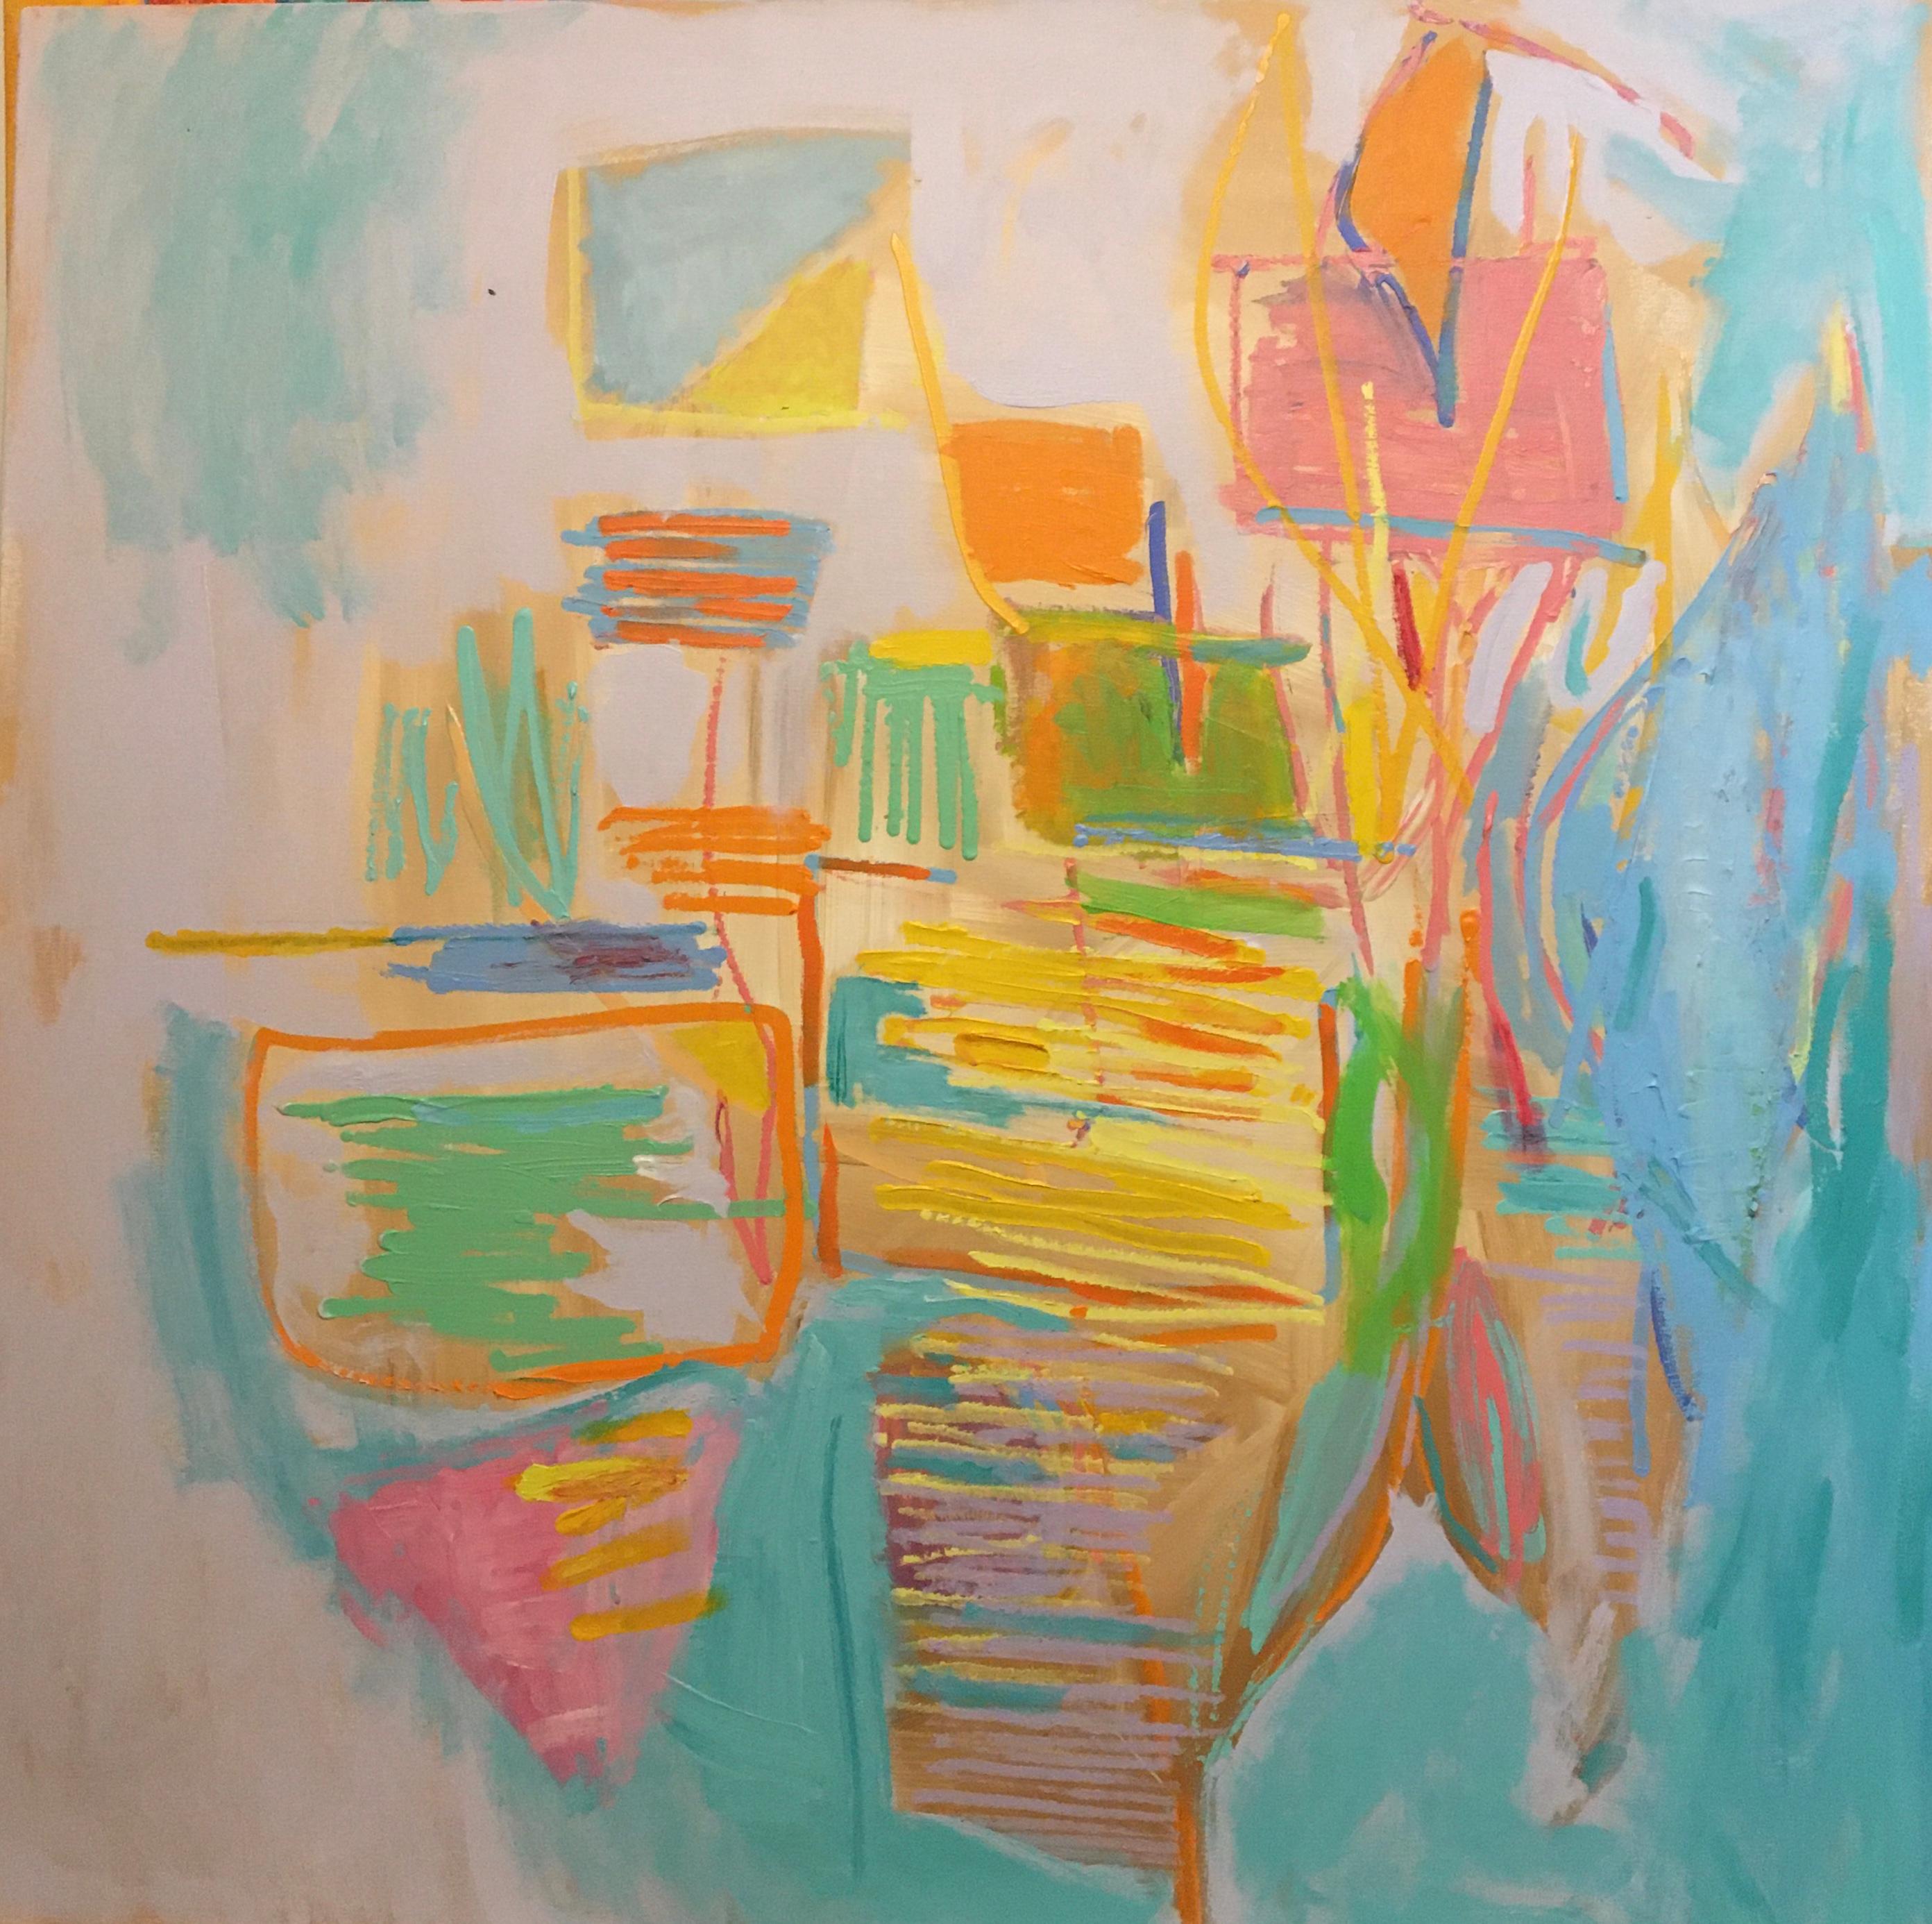 John Blee Abstract Painting - "Spring Wish" The title expresses the freshness of this colorful gestural work